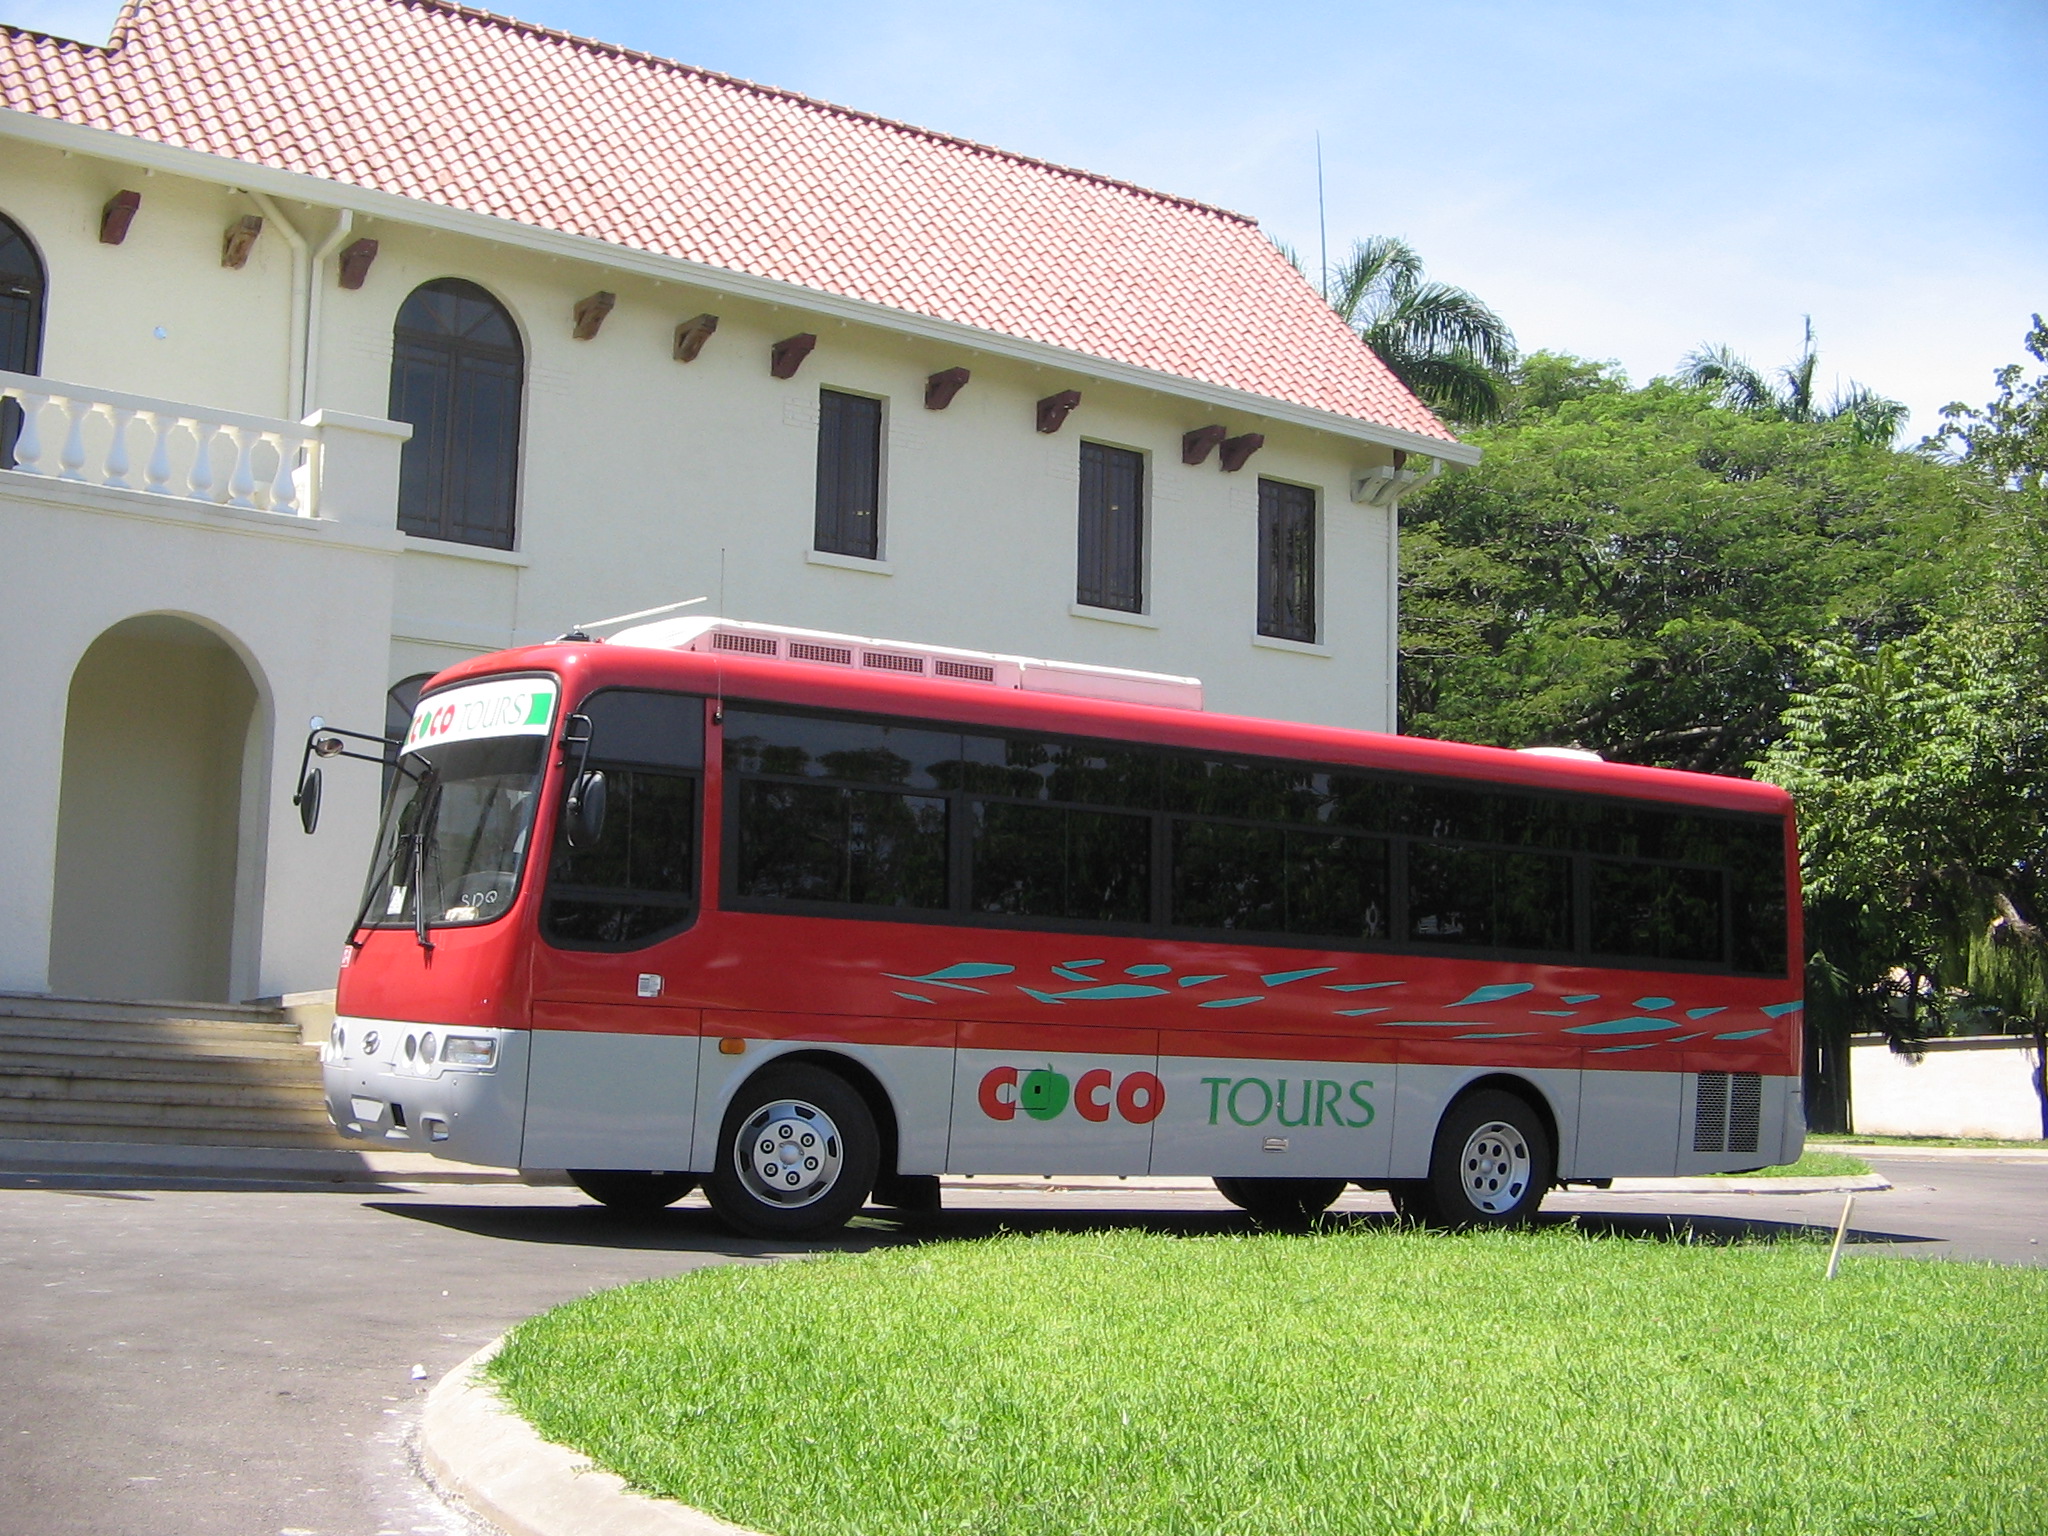 Larger Cocotours bus used on the route from Punta Cana to Samana